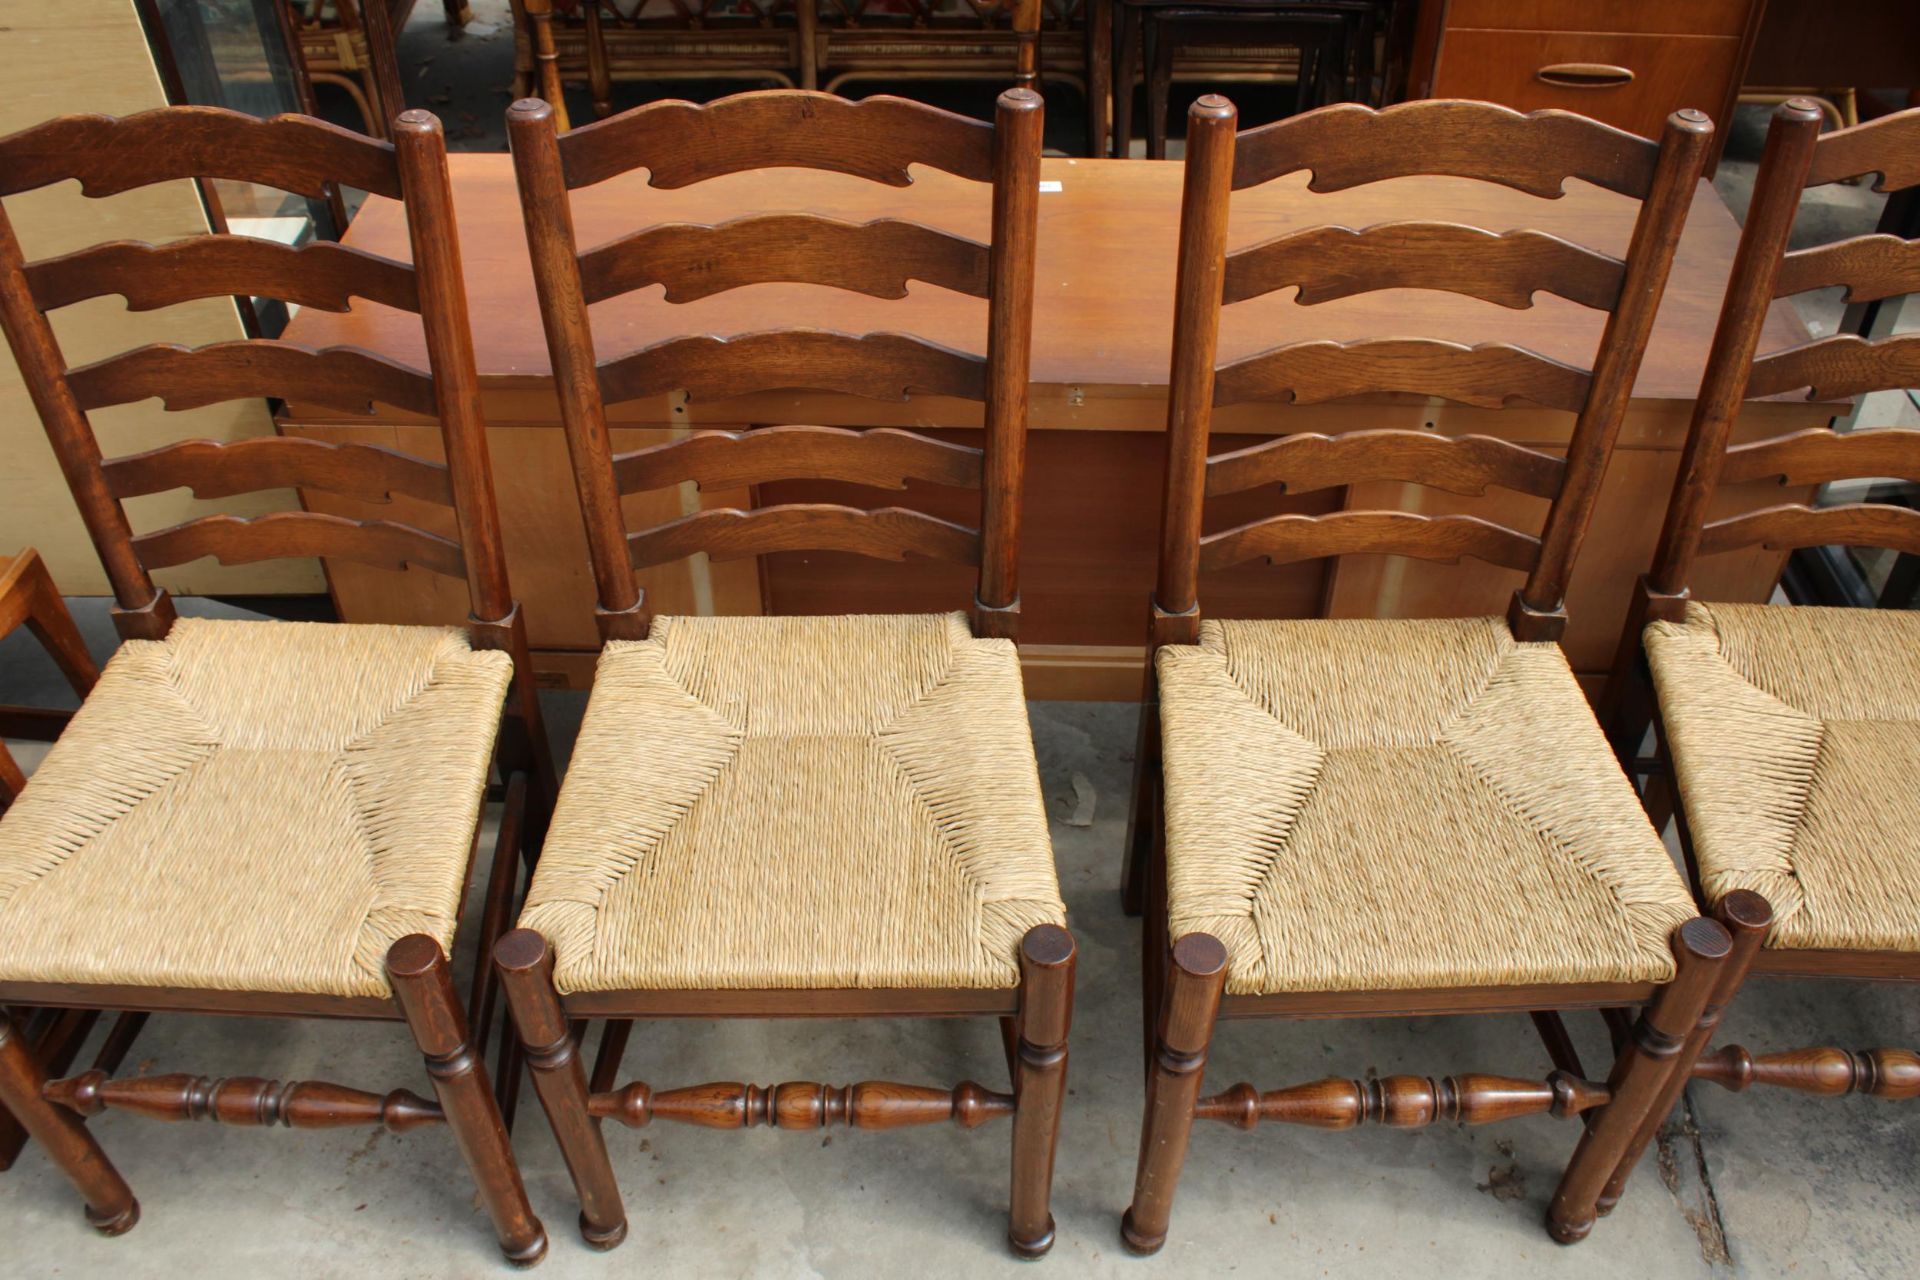 A SET OF FIVE ELM AND BEECH LANCASHIRE STYLE DINING CHAIRS WITH LADDER-BACKS AND RUSH SEATS - Image 3 of 3